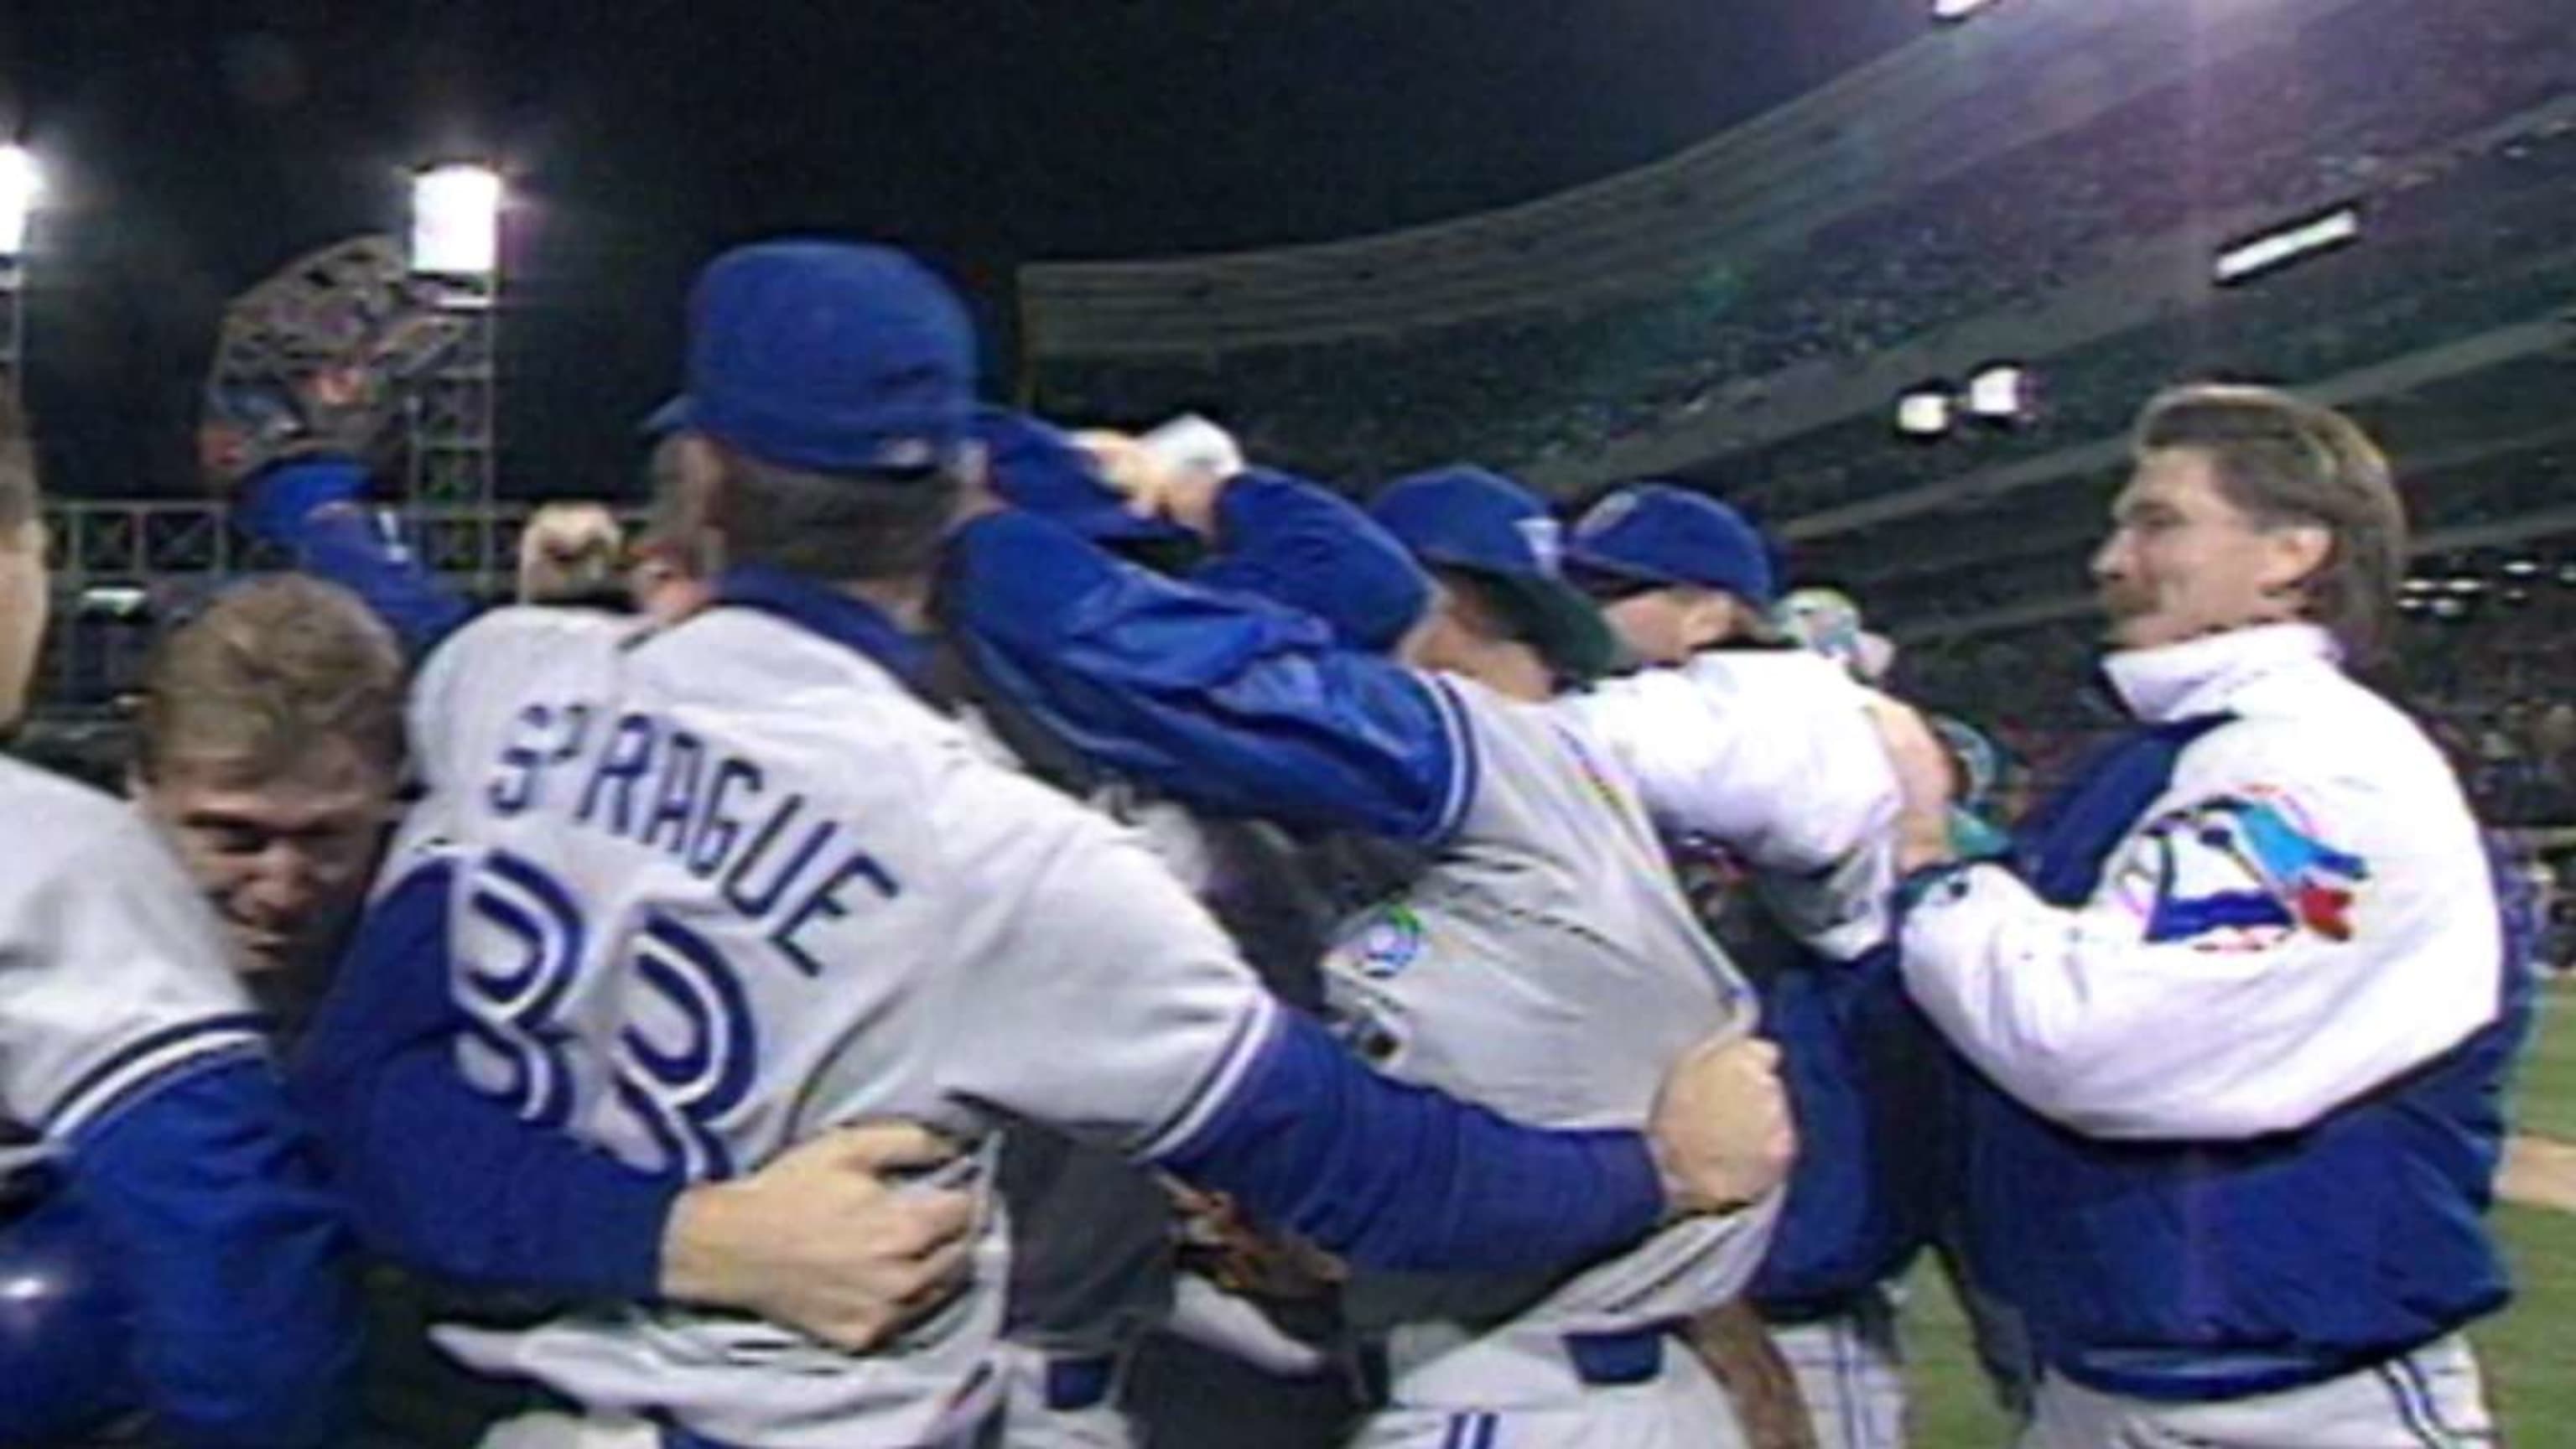 Blue Jays history in World Series: When was last appearance? How